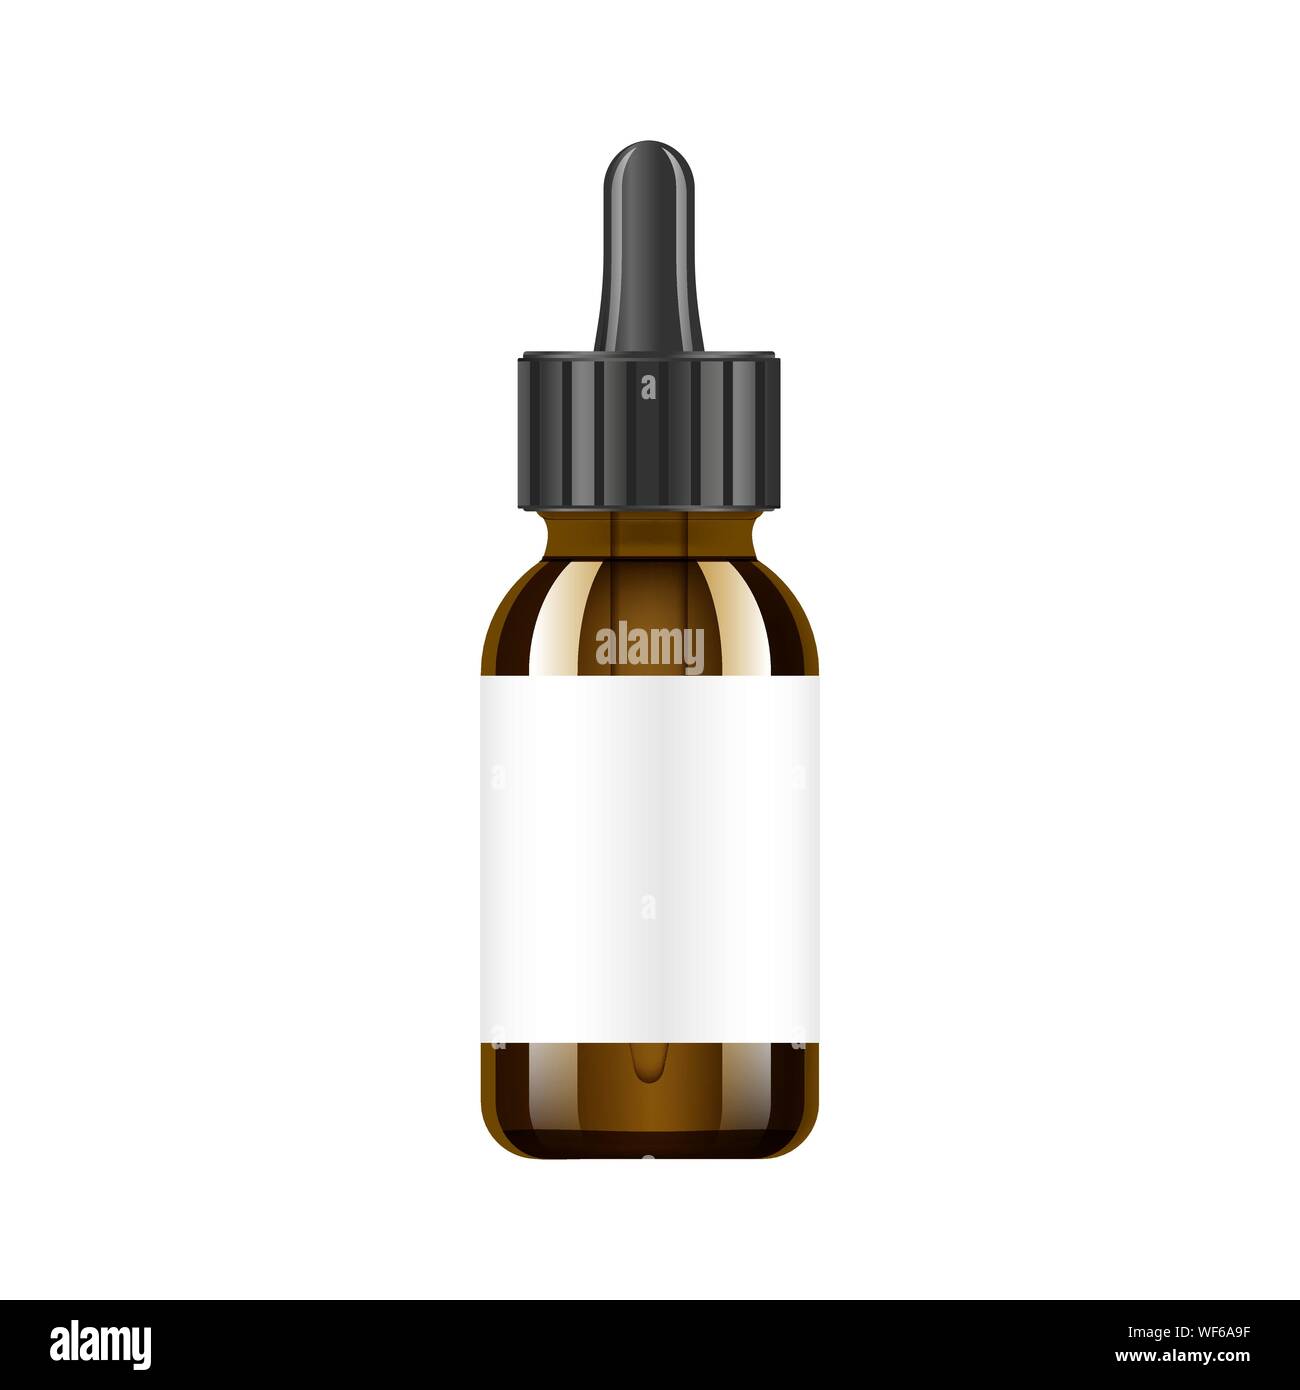 Download Realistic Essential Oil Brown Bottle Mock Up Bottle Cosmetic Vial Flask Flacon Medical Bank Cosmetic Dropper Bottle With Design Label Vector Stock Vector Image Art Alamy